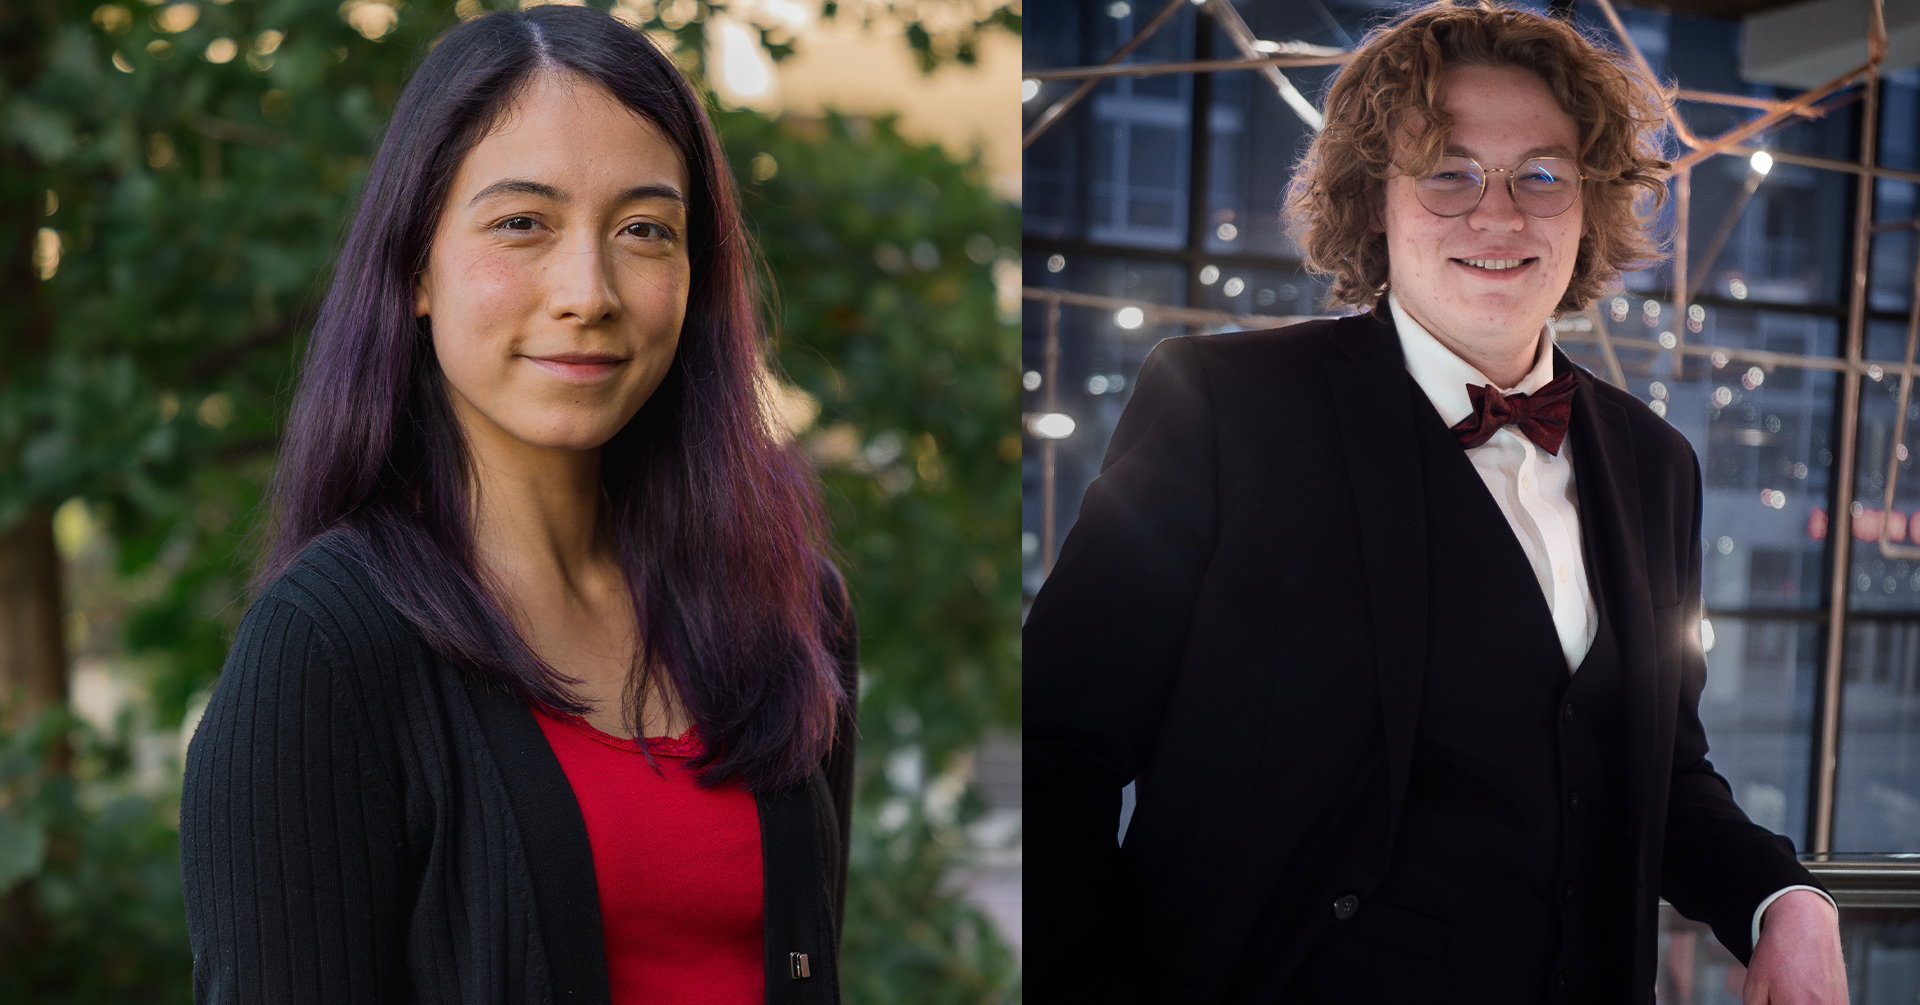 The winners of the 2022 Symphony Orchestra Concerto Competition are Elizabeth Vaughan, piano, and Benjamin Davies Hudson, violin.